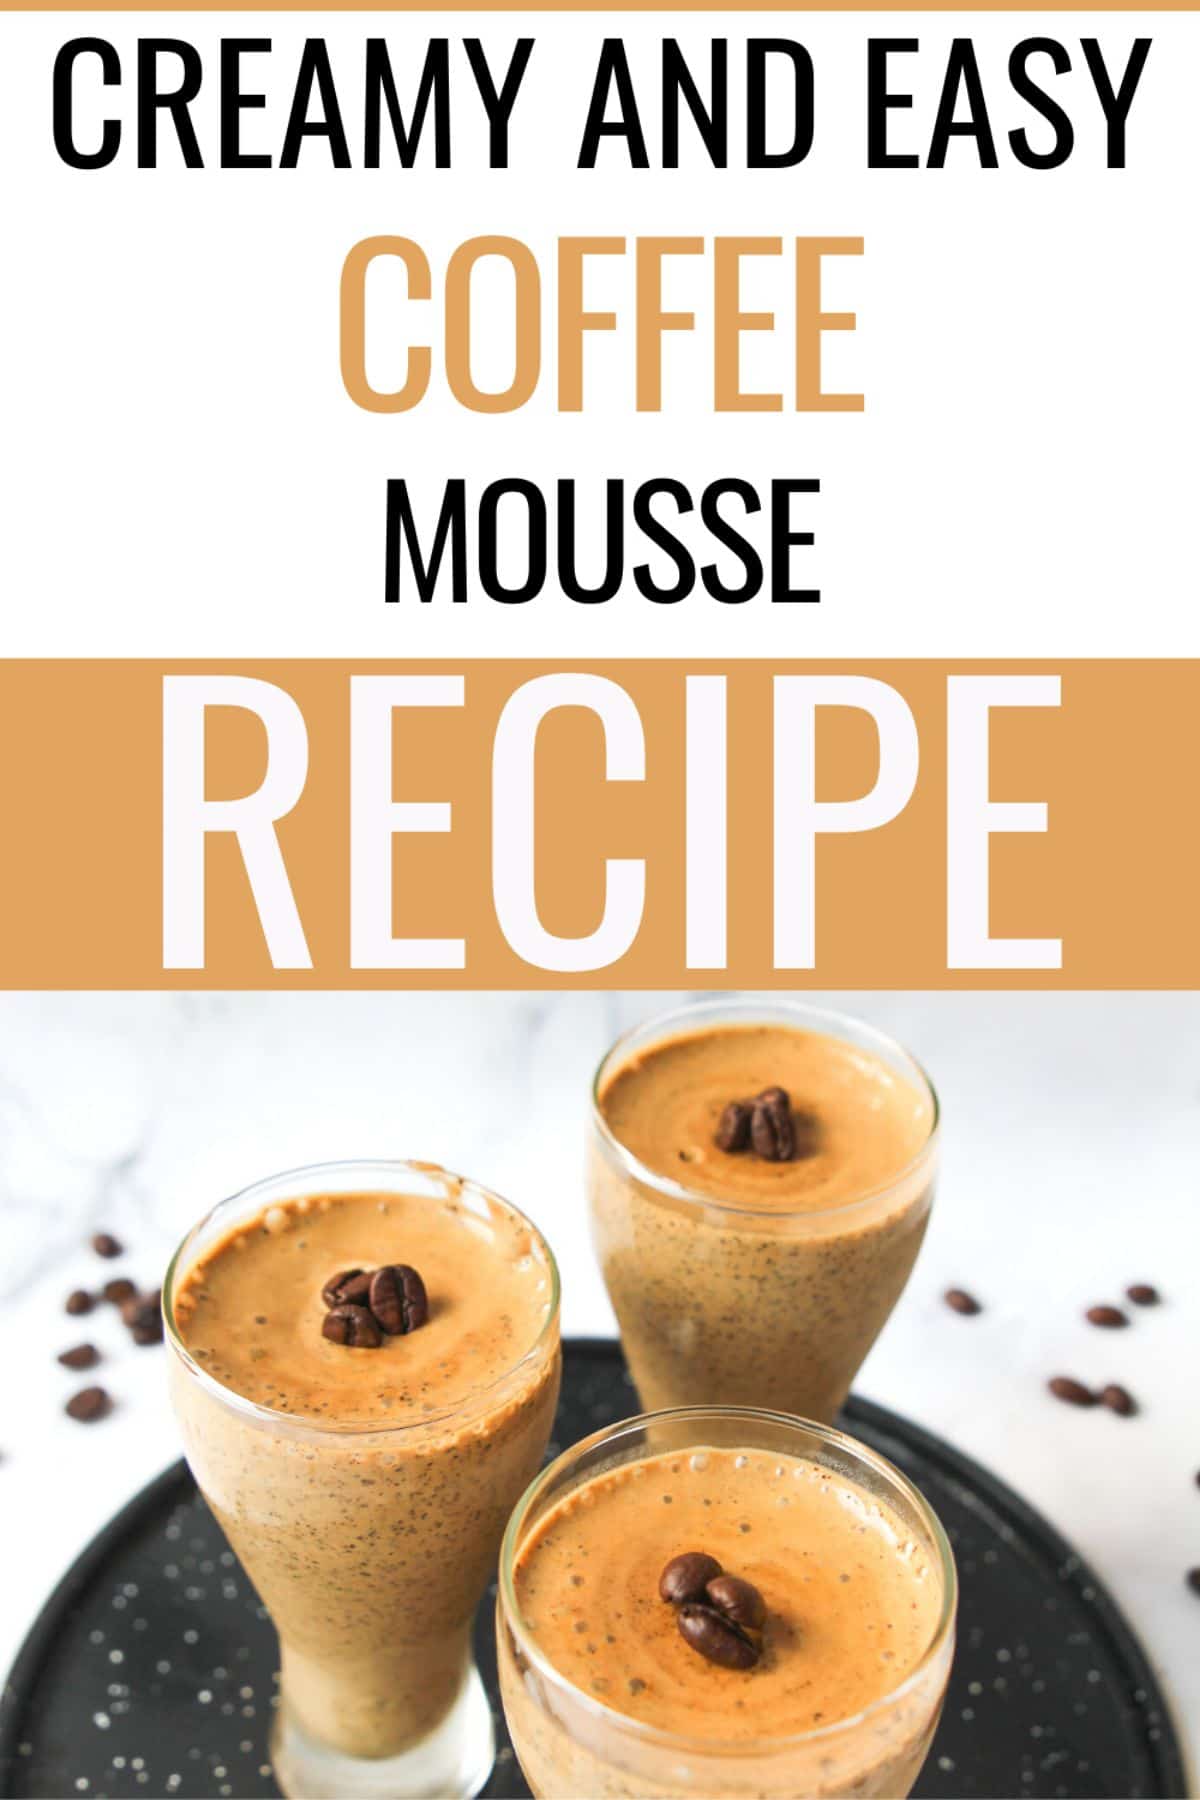 Three tall glasses filled with Coffee Mousse topped with chocolate chips and a text at the upper half of the image saying "Creamy and Easy Coffee Mousse Recipe"